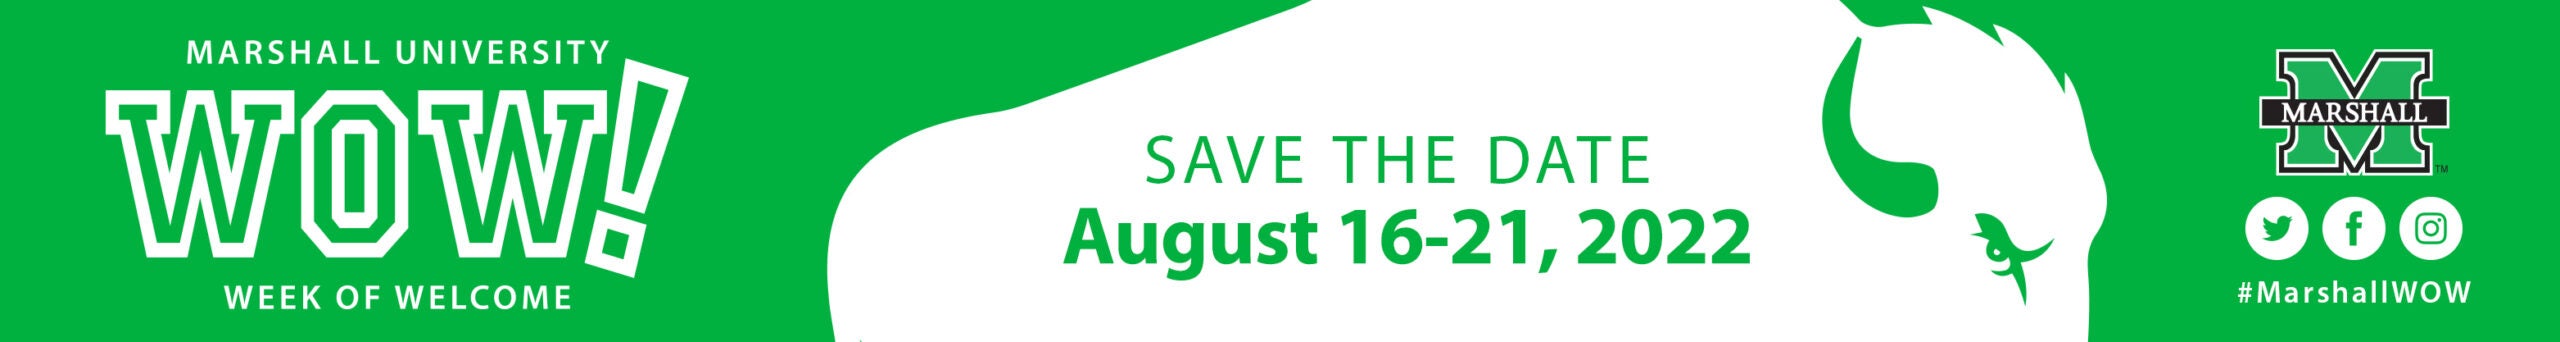 Save the Date: August 16-21, 2021